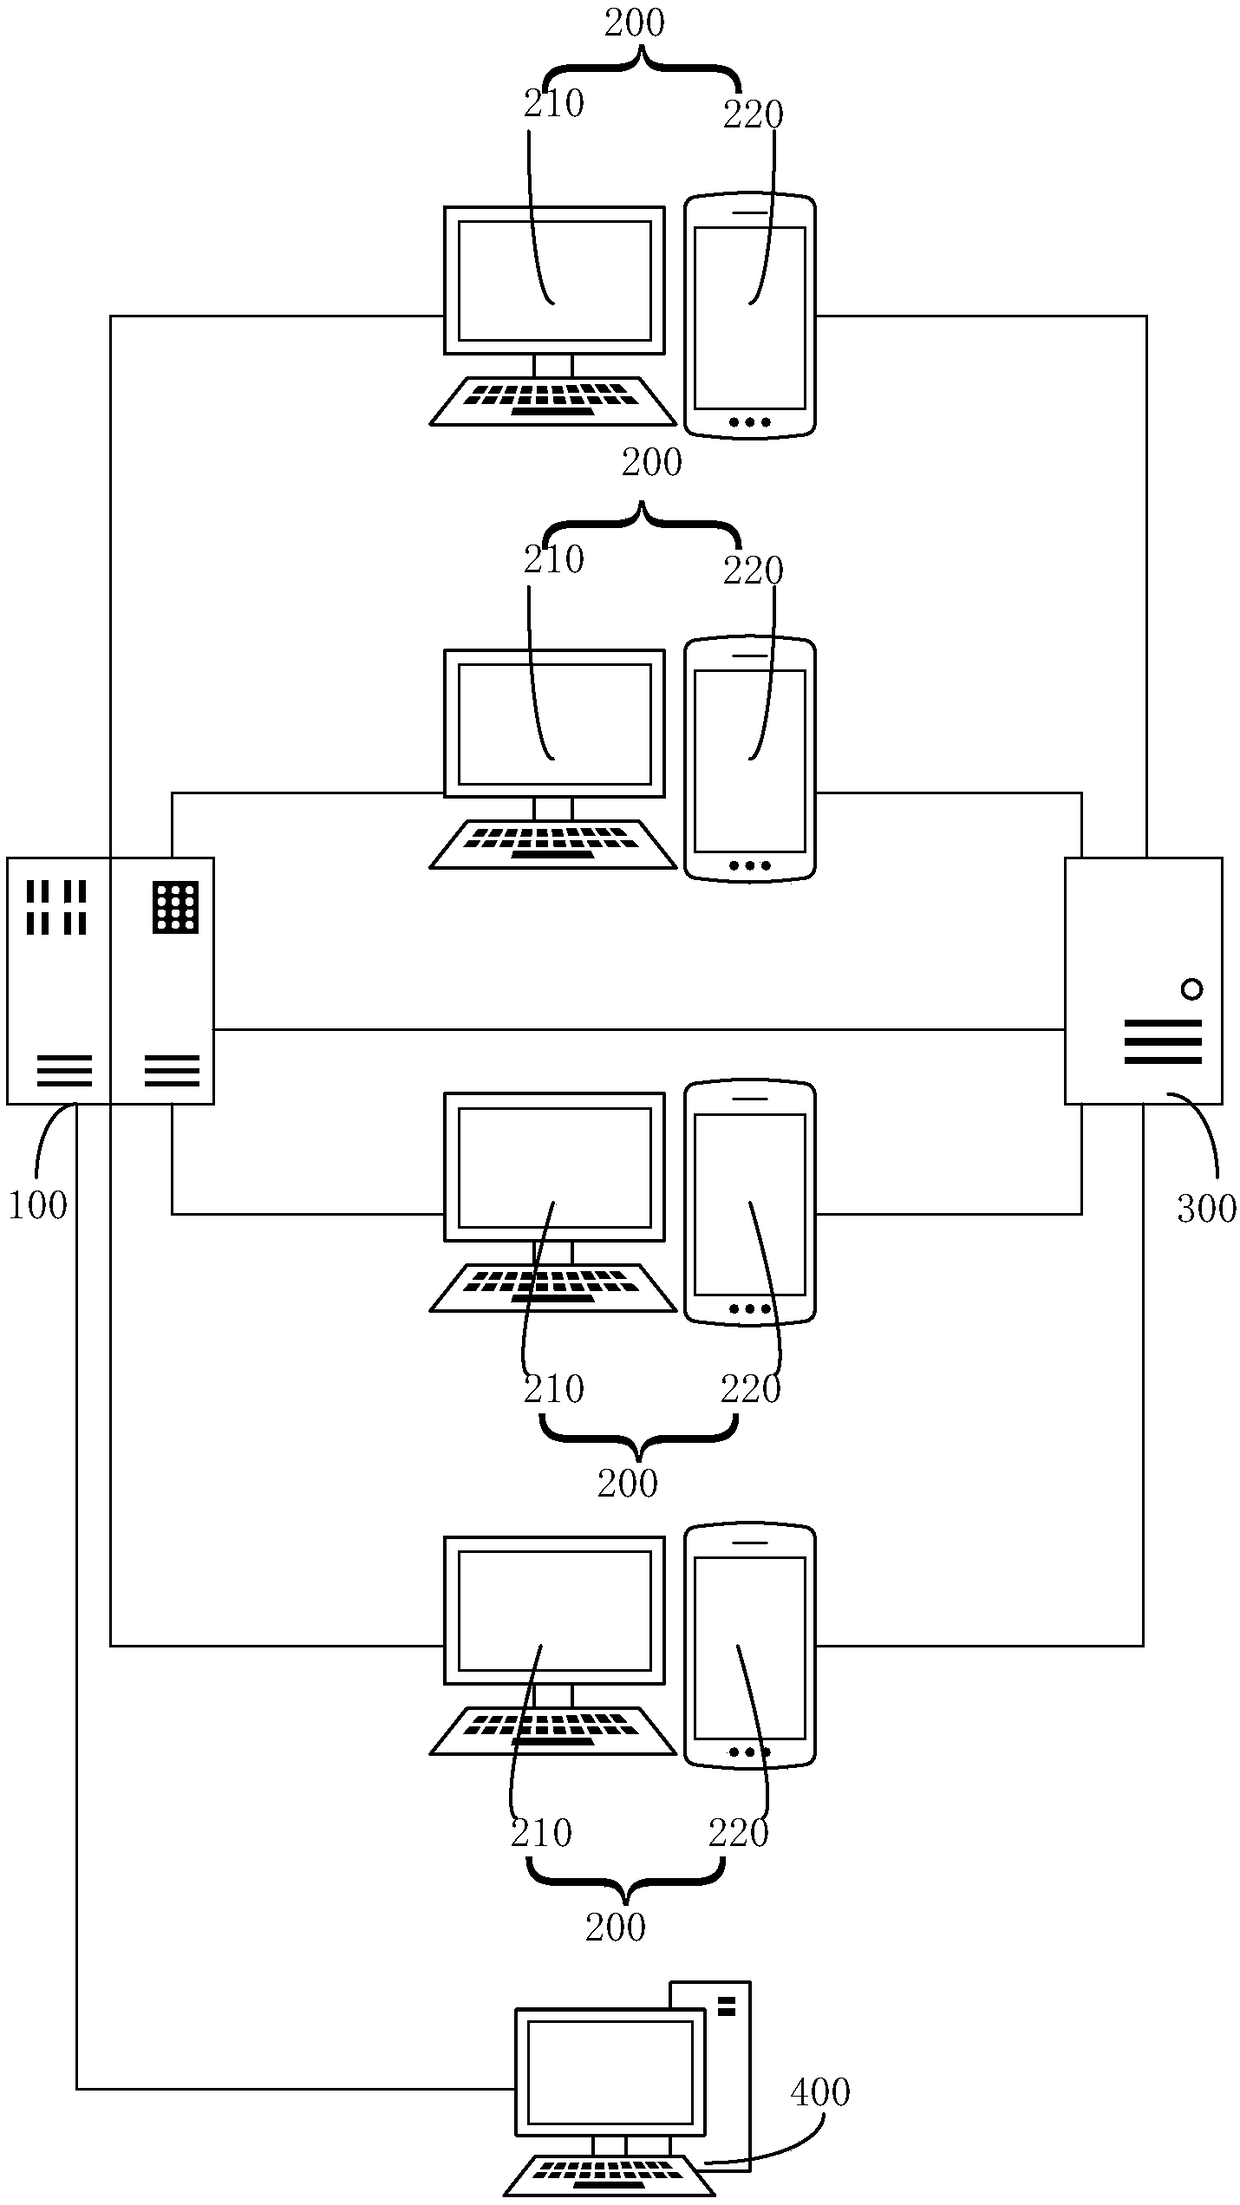 Agent station management method and device based on state monitoring